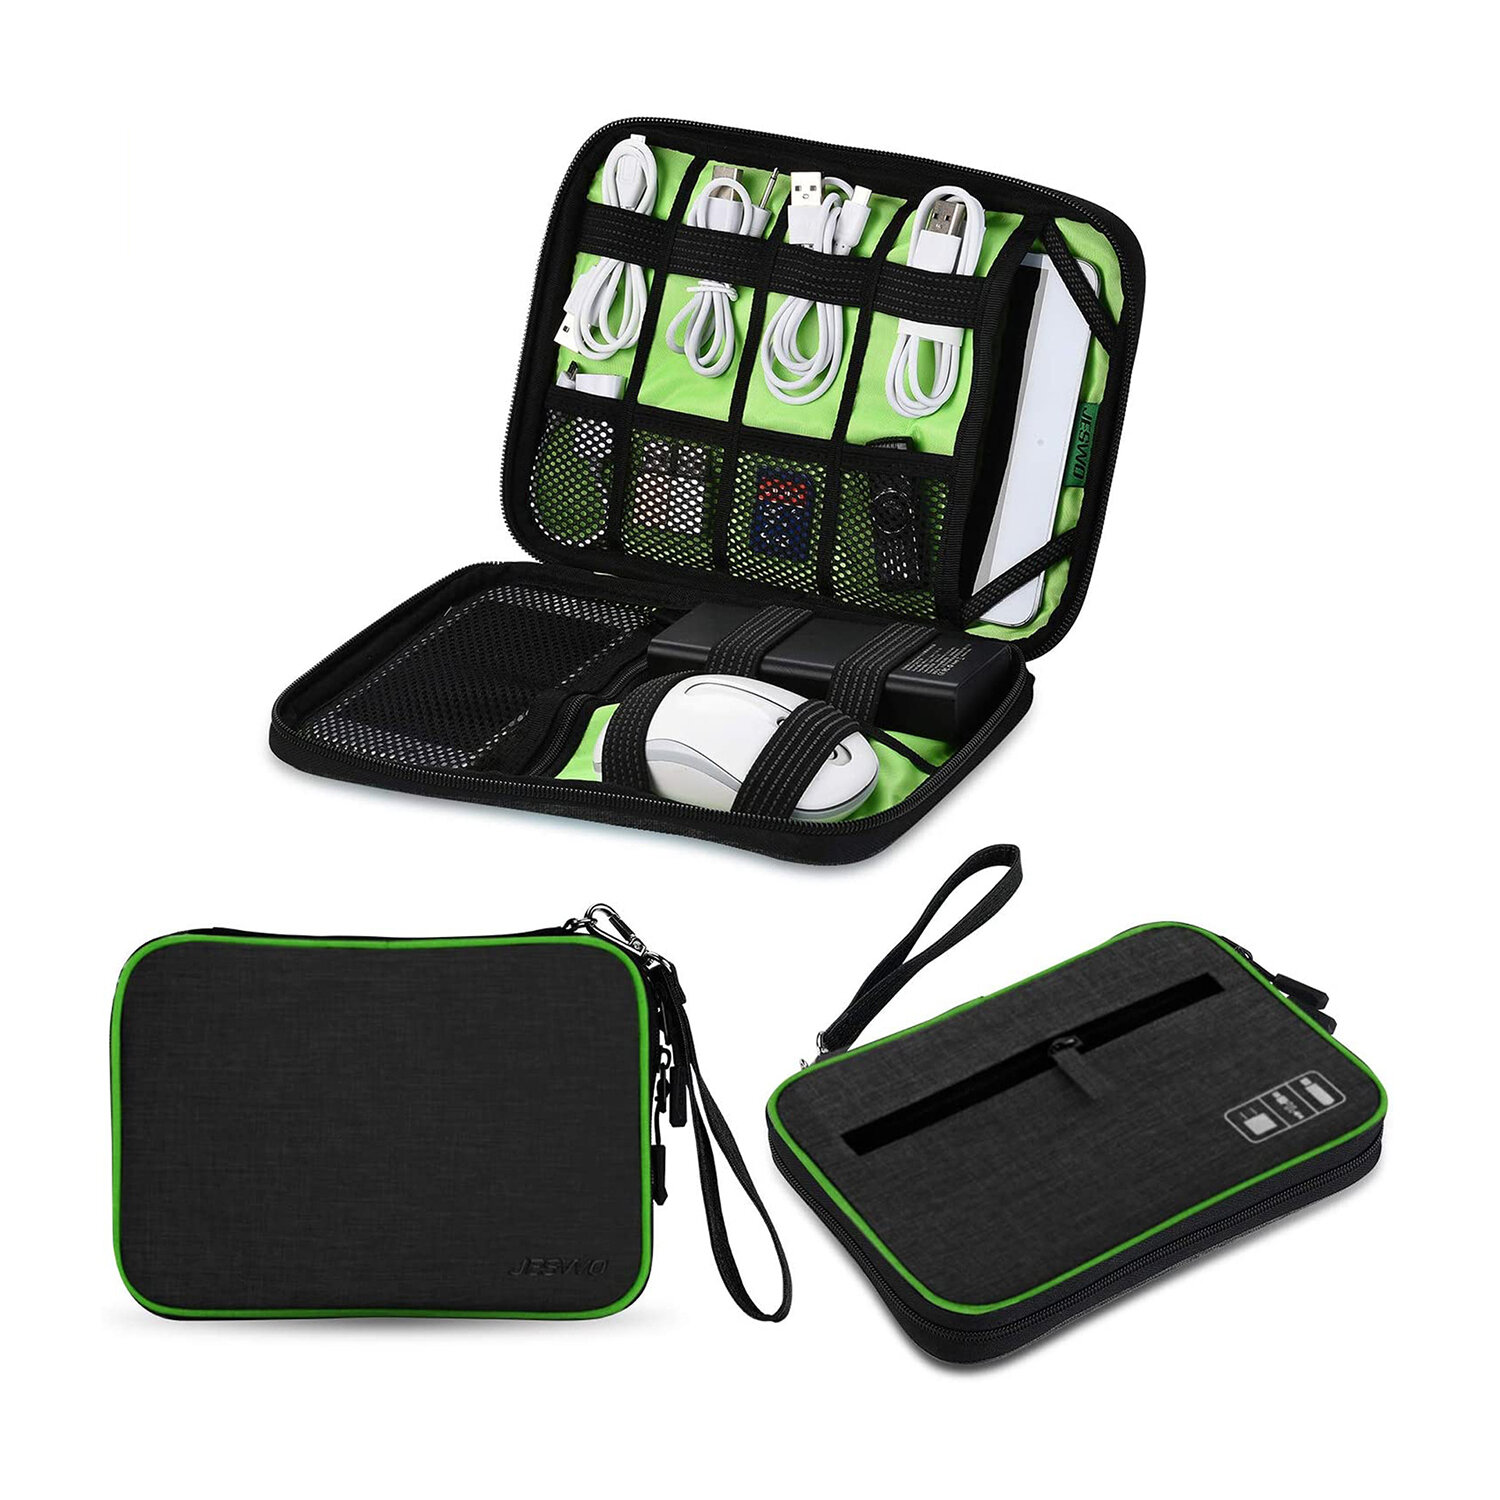 Electronics Accessories Organizer Bag Digital Accessories Storage Bag for Tablet, Charger, Cables, E